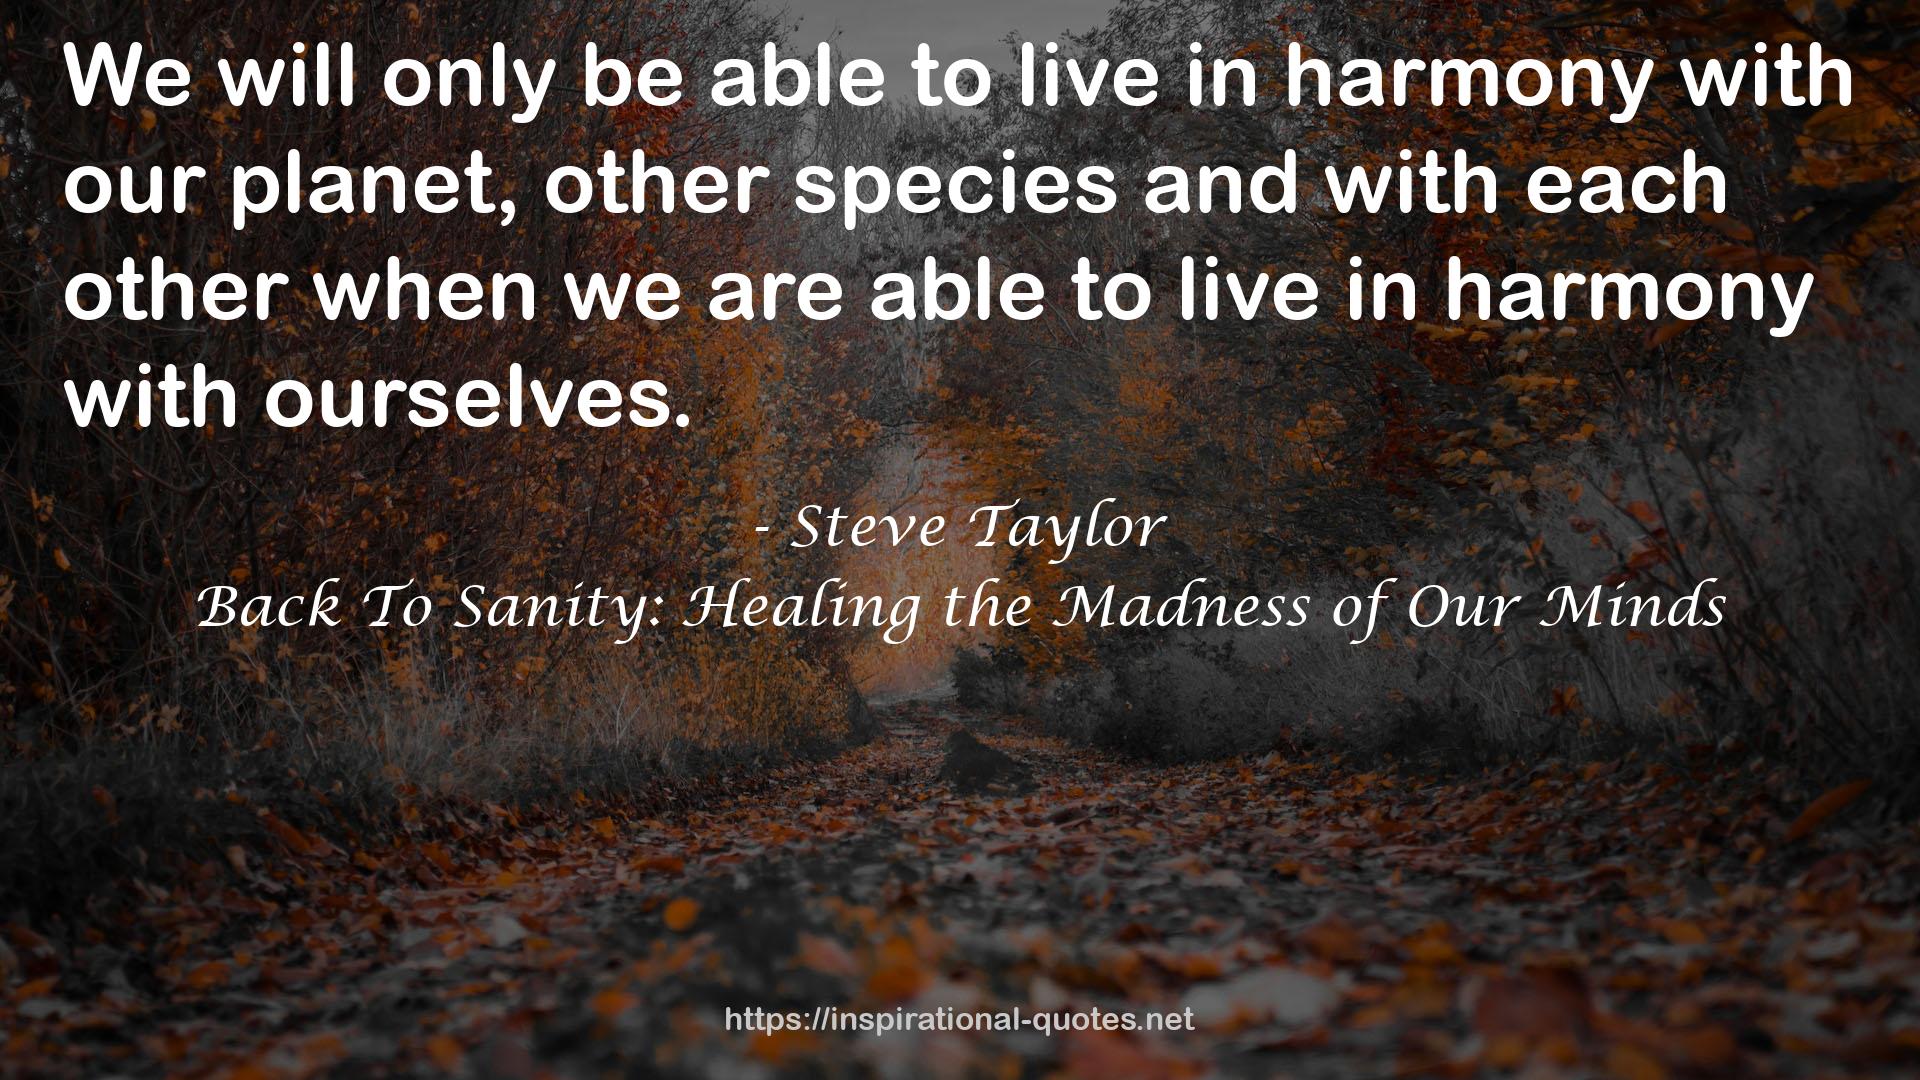 Back To Sanity: Healing the Madness of Our Minds QUOTES